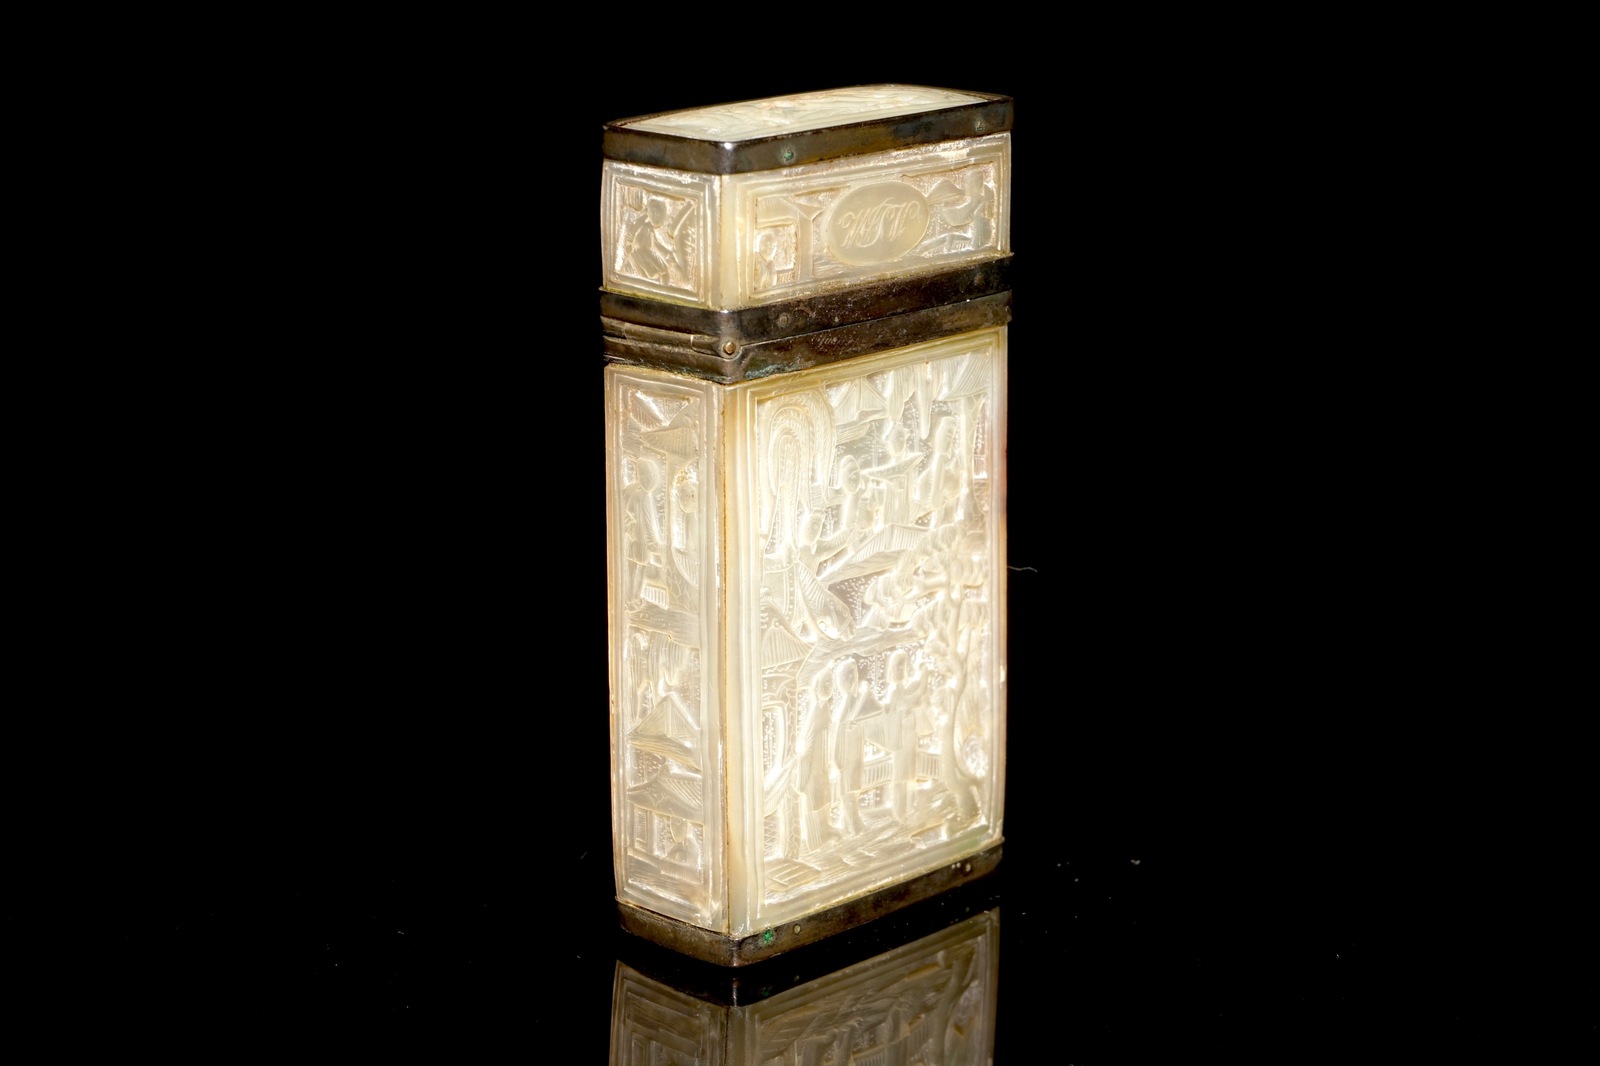 A Chinese mother of pearl cigarette box with relief design, 19th C. Dim.: 7,5 x 4 x 1,5 cm Condition